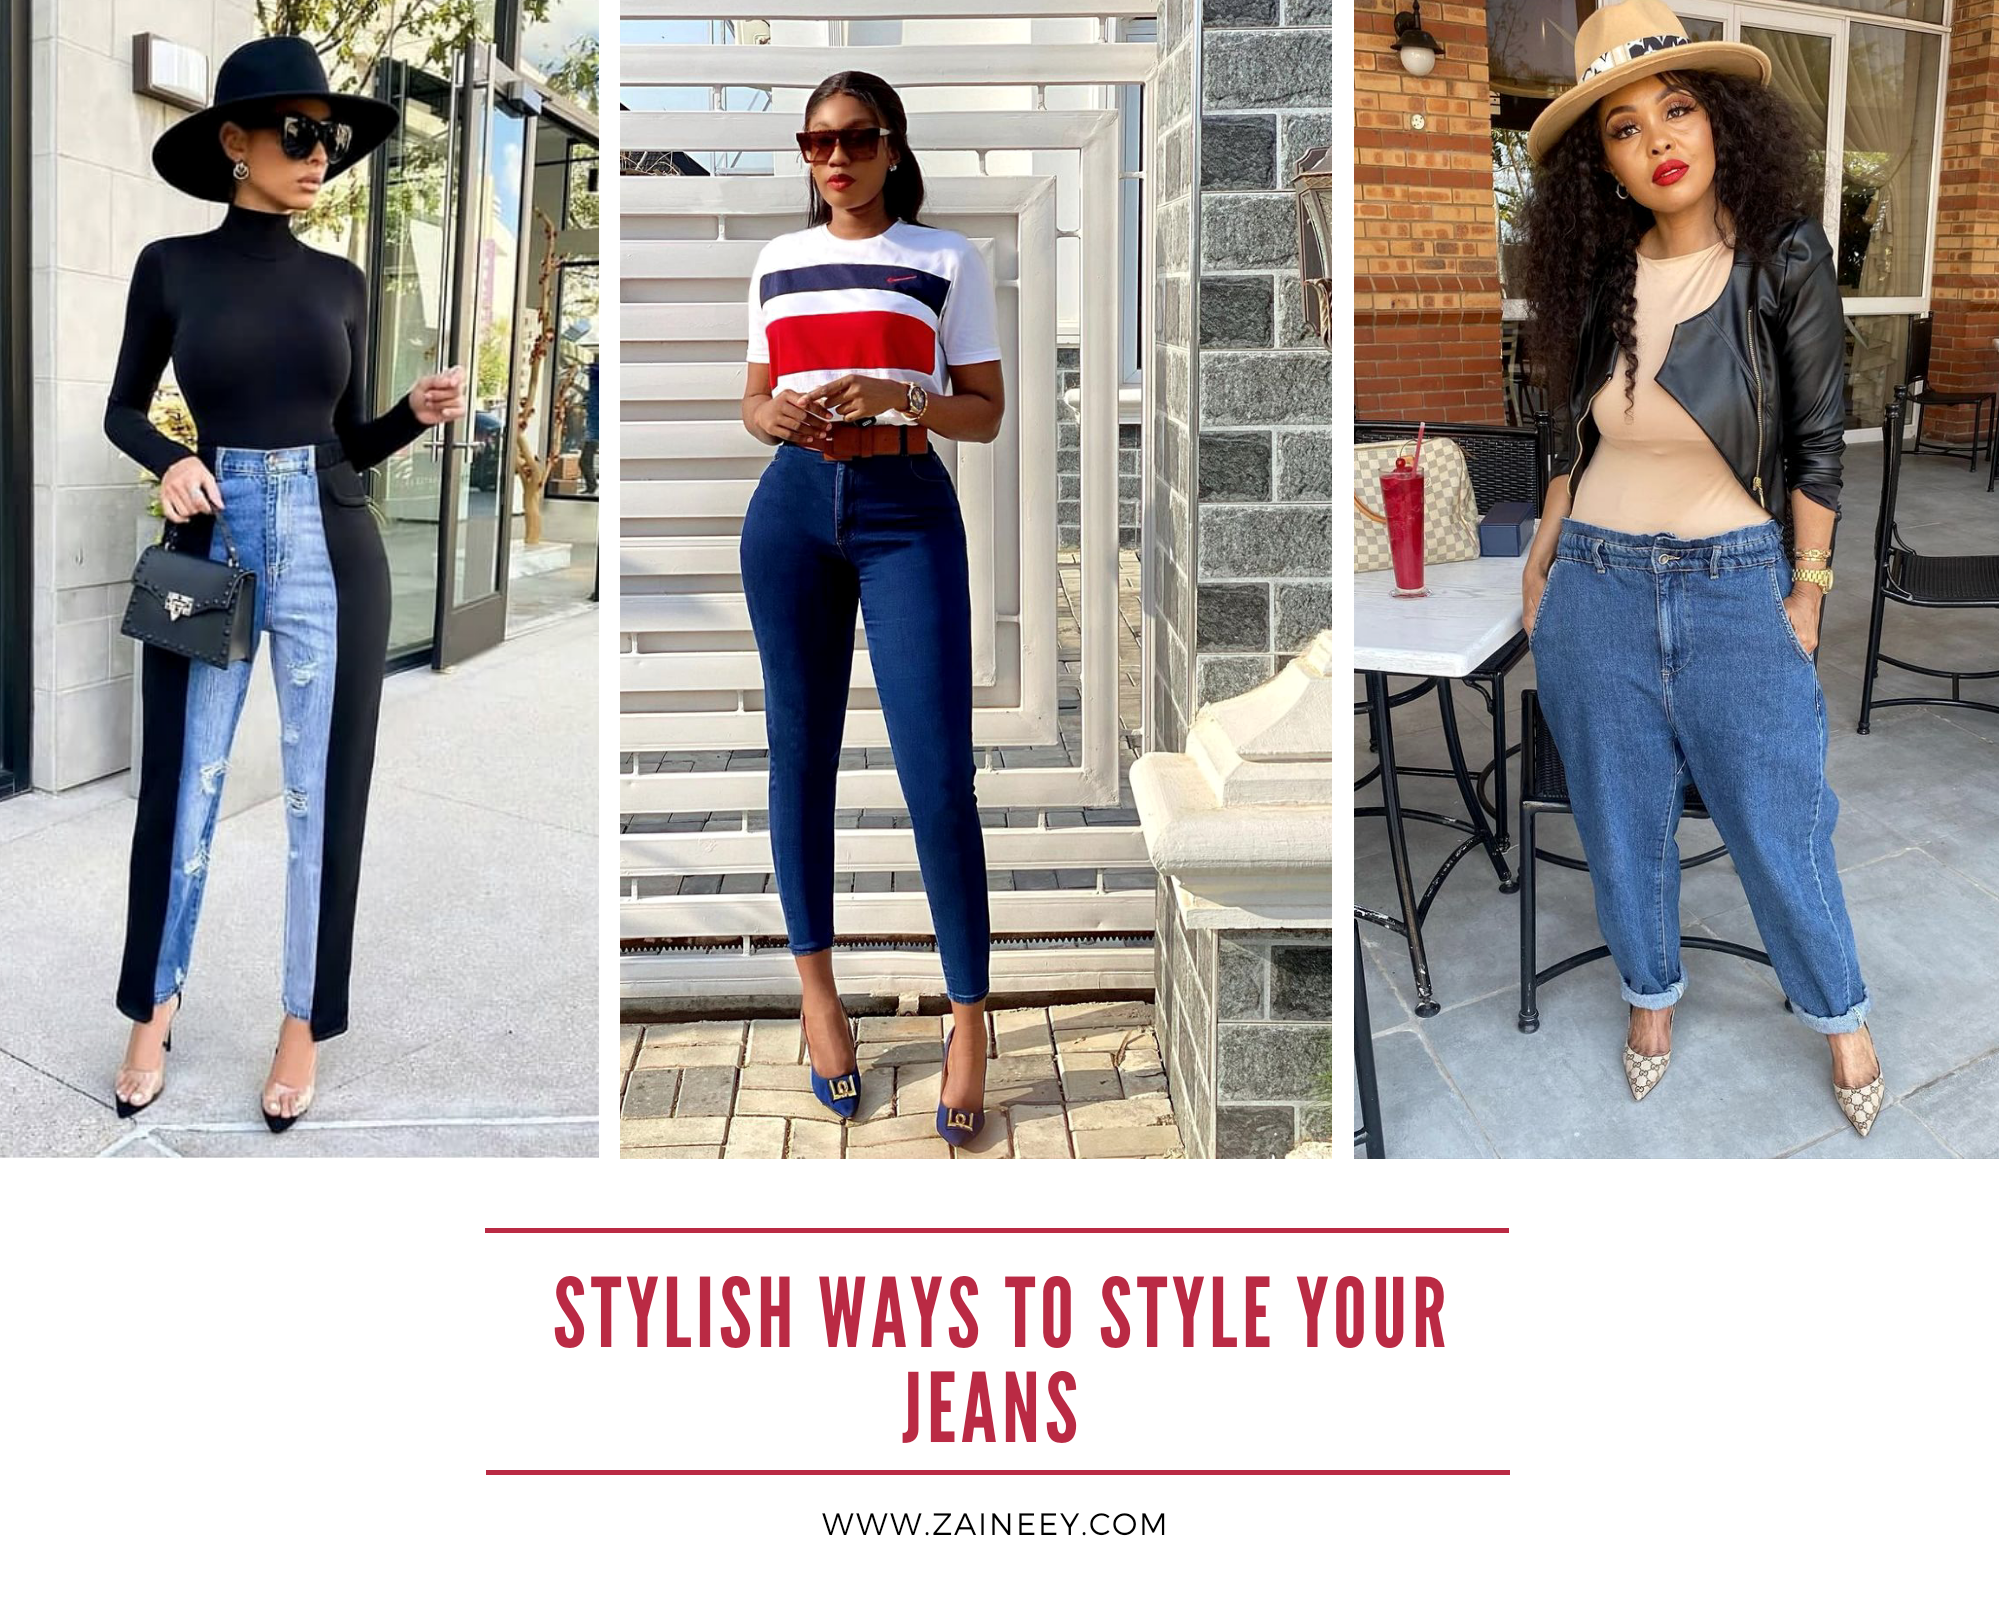 Styles to wear with jeans | Zaineey's Blog